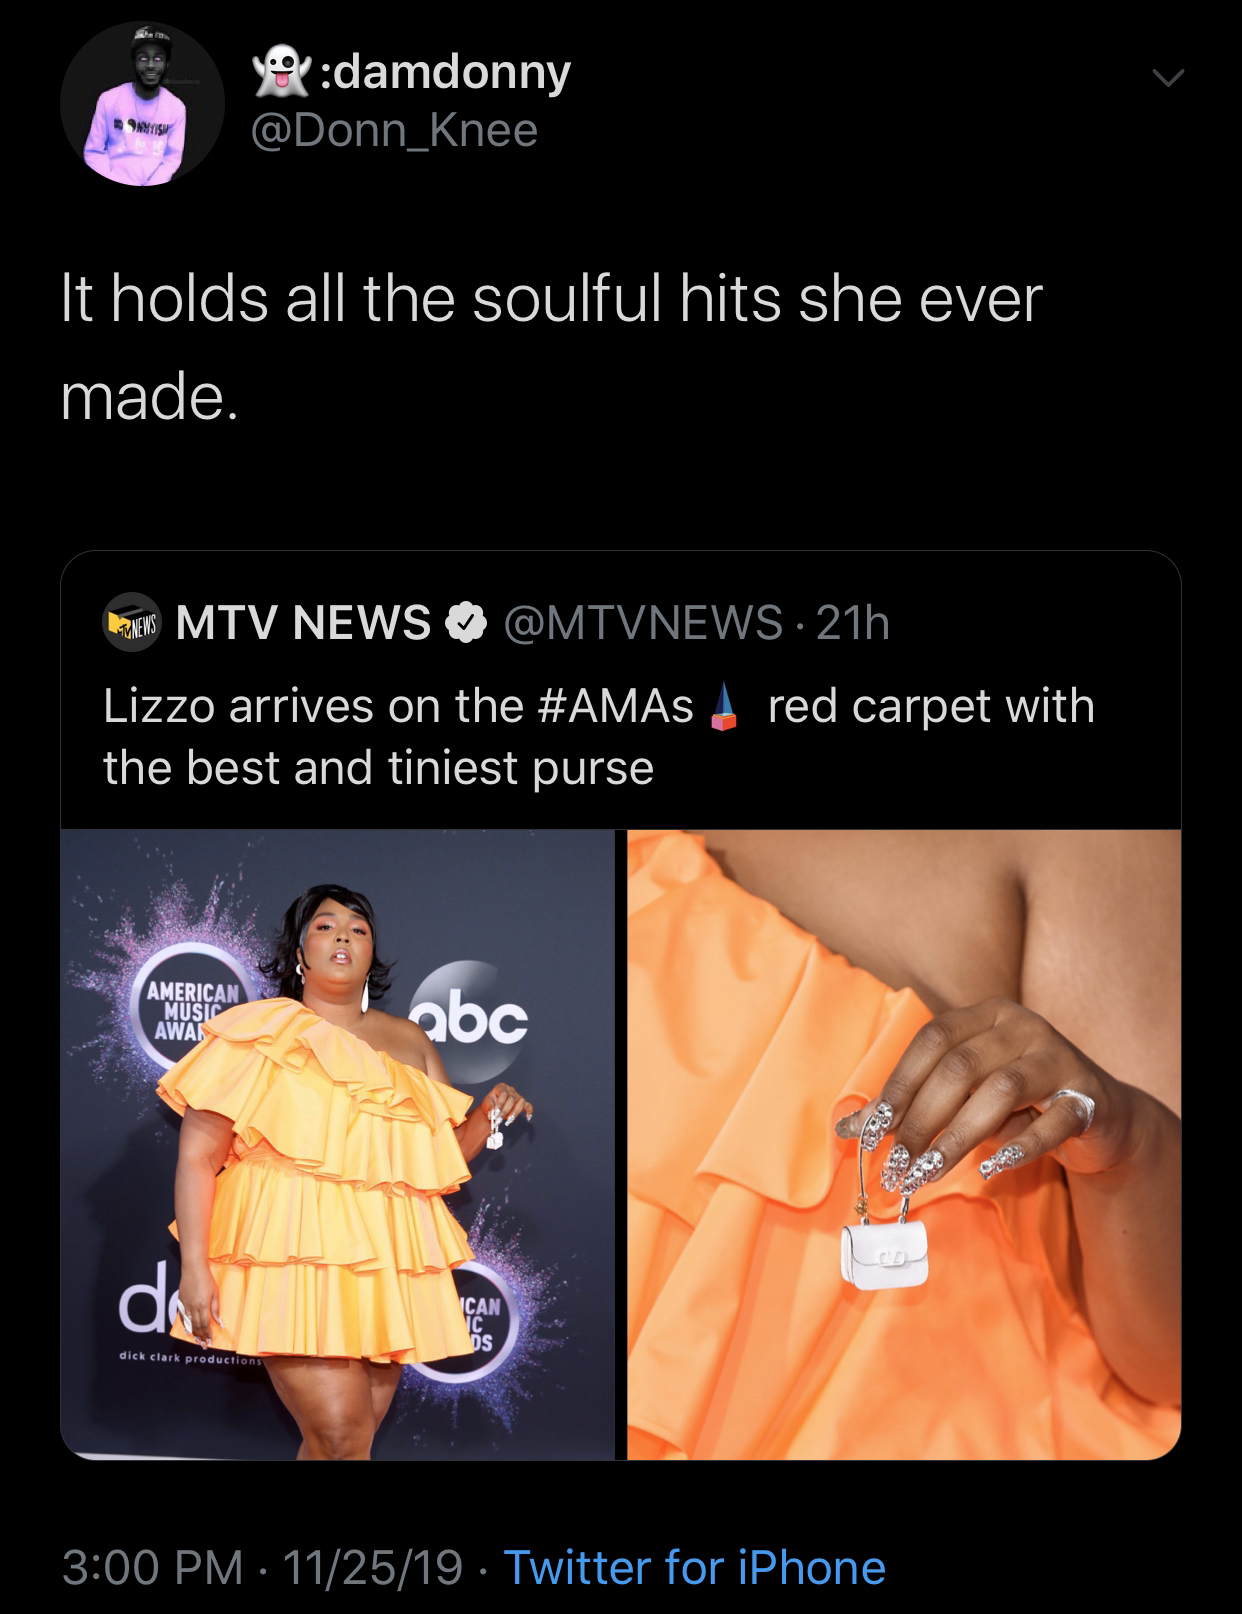 human - damdonny 'It holds all the soulful hits she ever made. Mtv News Lizzo arrives on the red carpet with the best and tiniest purse abc 112519. Twitter for iPhone